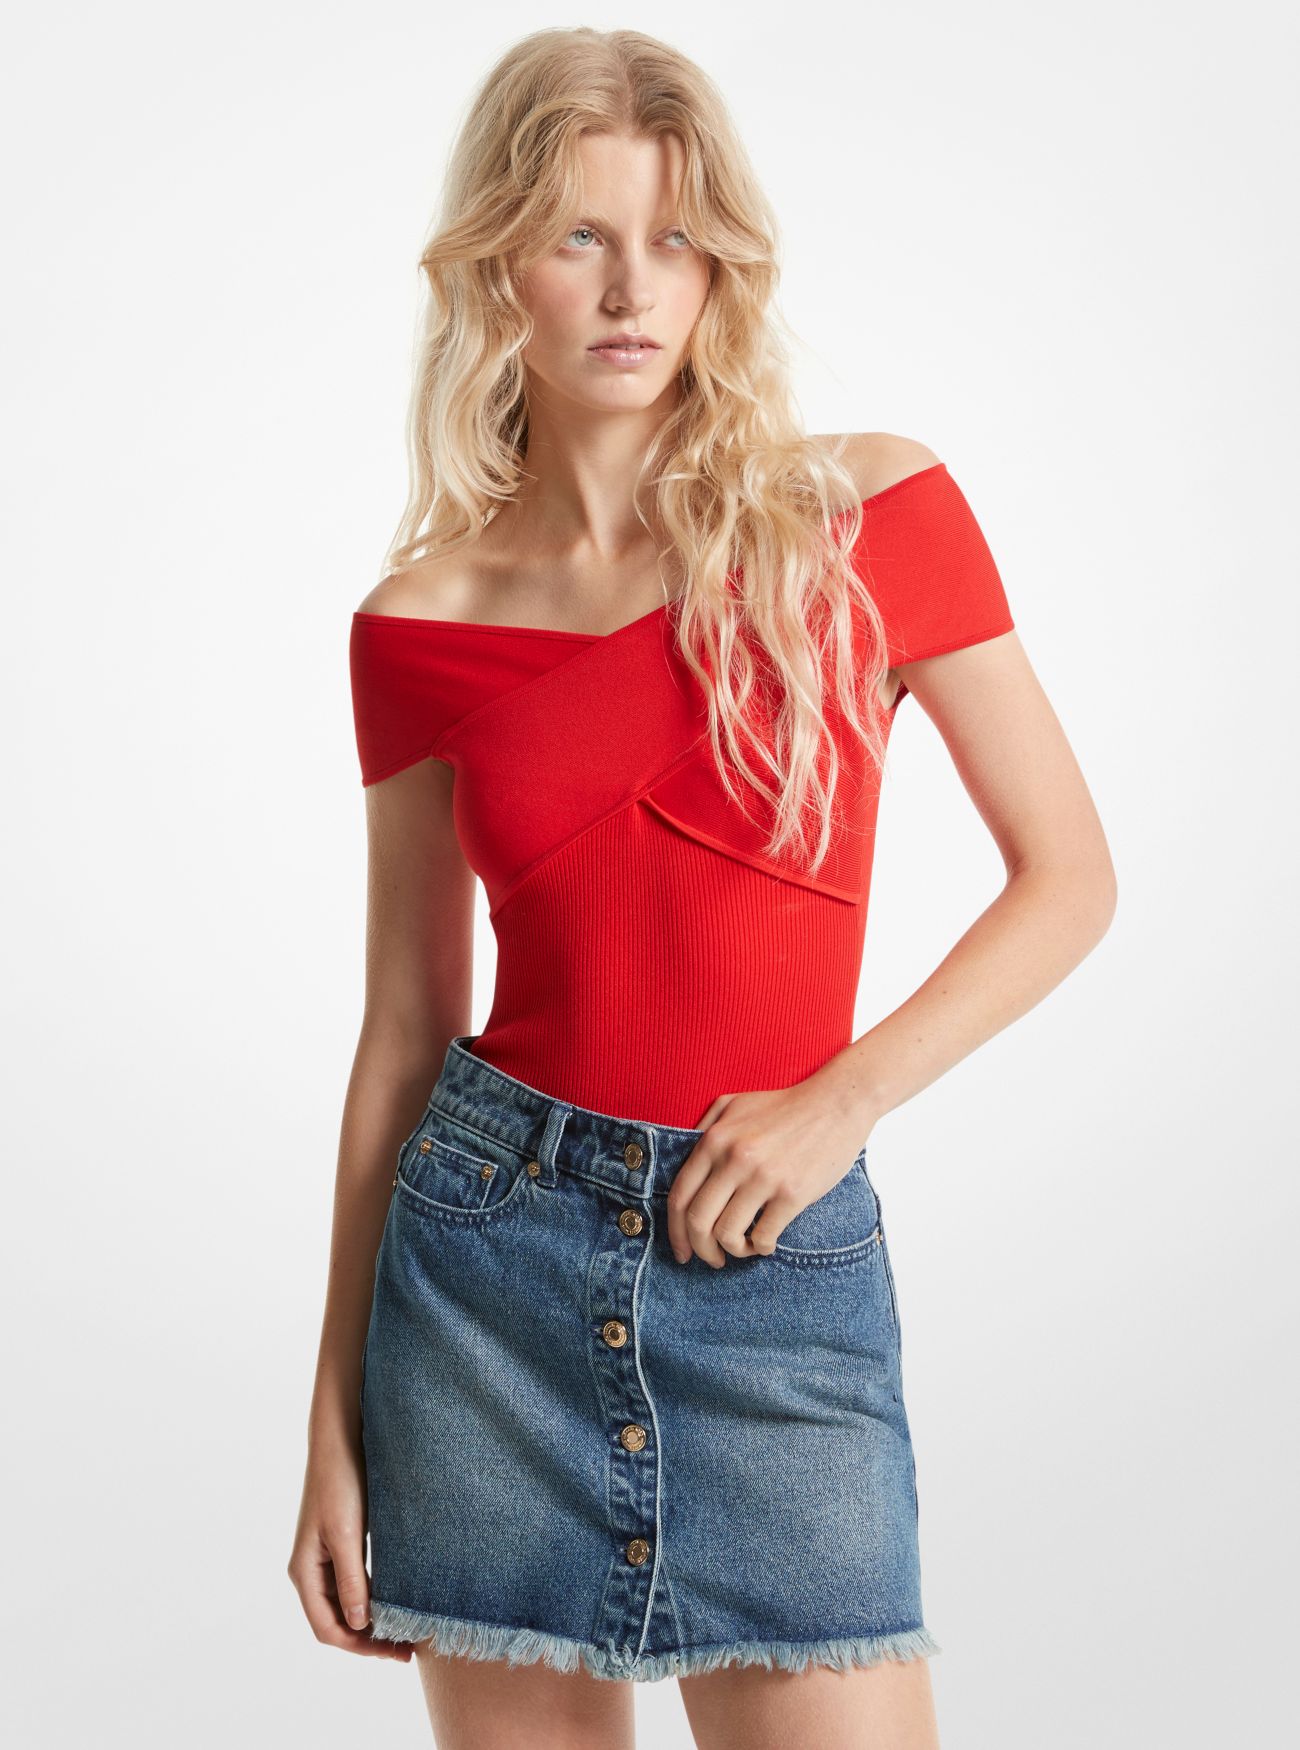 MK Ribbed Stretch Knit Crossover Bodysuit - Red - Michael Kors